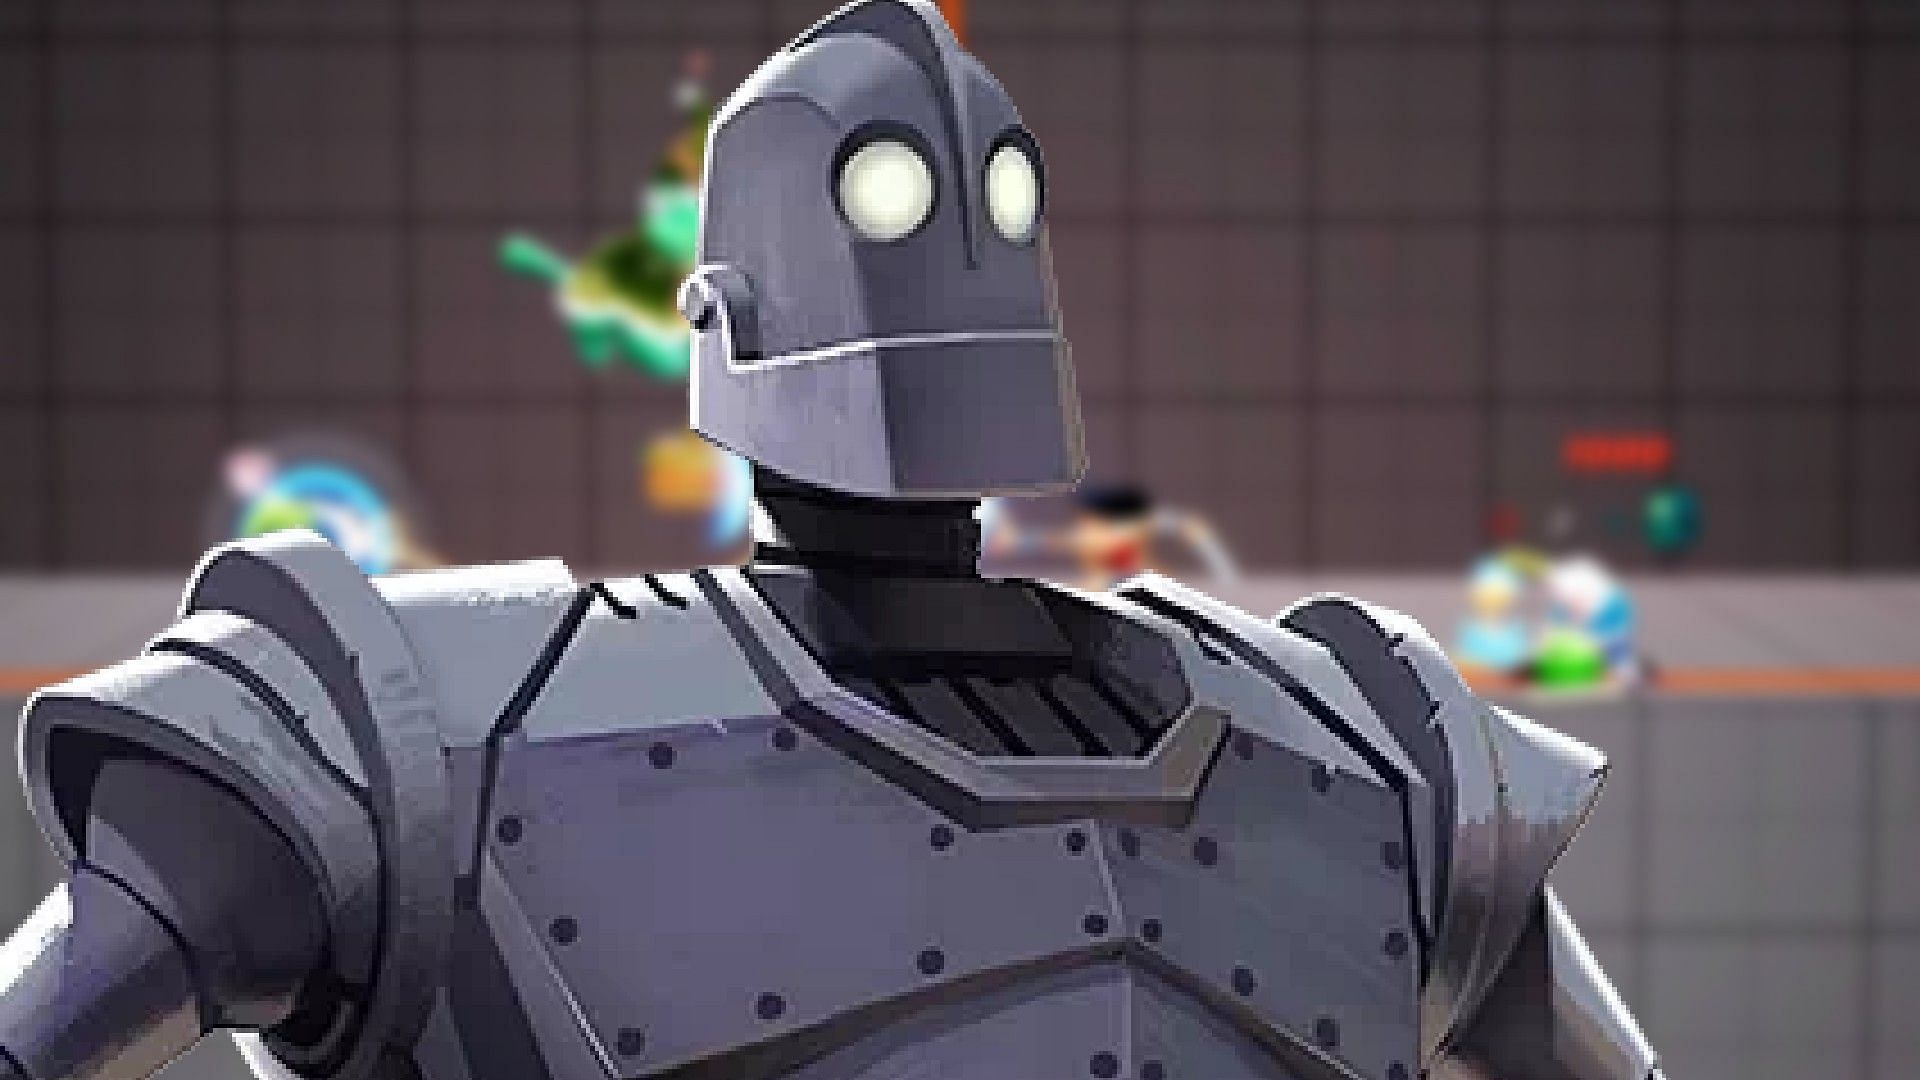 The Classic costume for the Iron Giant (Image via Warner Bros. Interactive Entertainment)